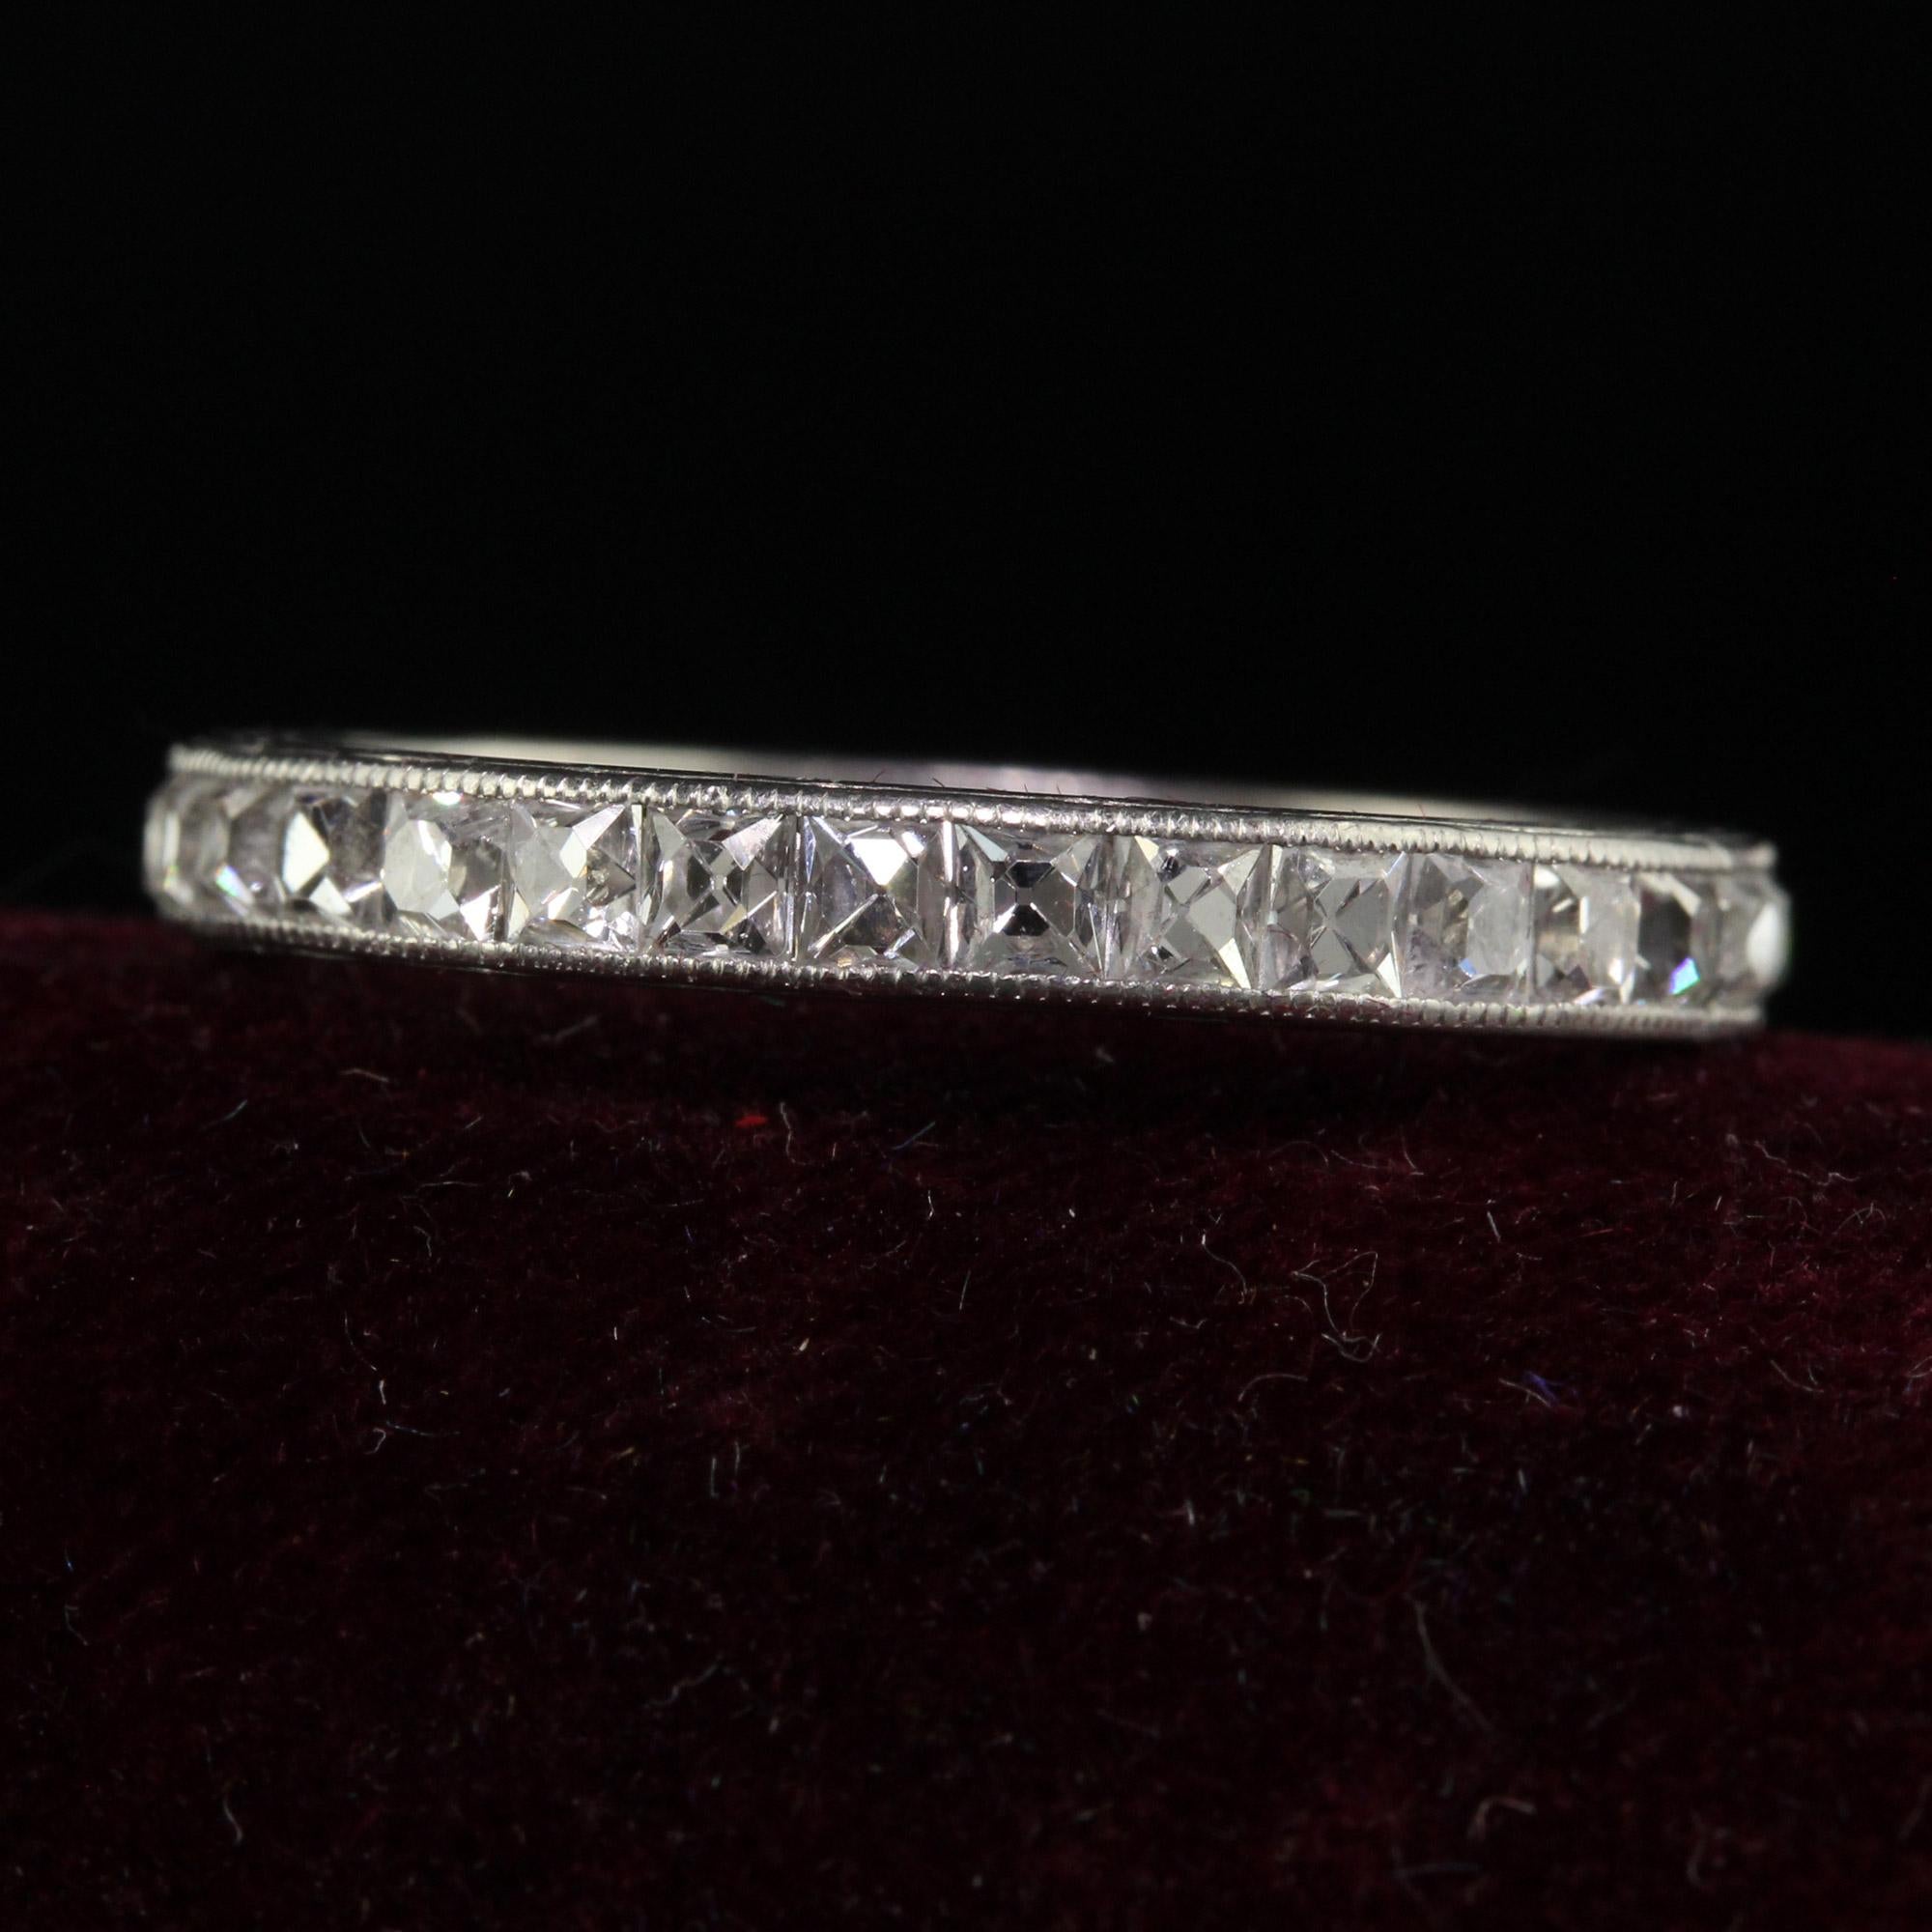 Beautiful Antique Edwardian Platinum French Cut Diamond Engraved Eternity Ring - Size 7. This incredible art deco French cut diamond band is crafted in platinum. The ring has gorgeous chunky French cut diamonds going around the entire ring. The